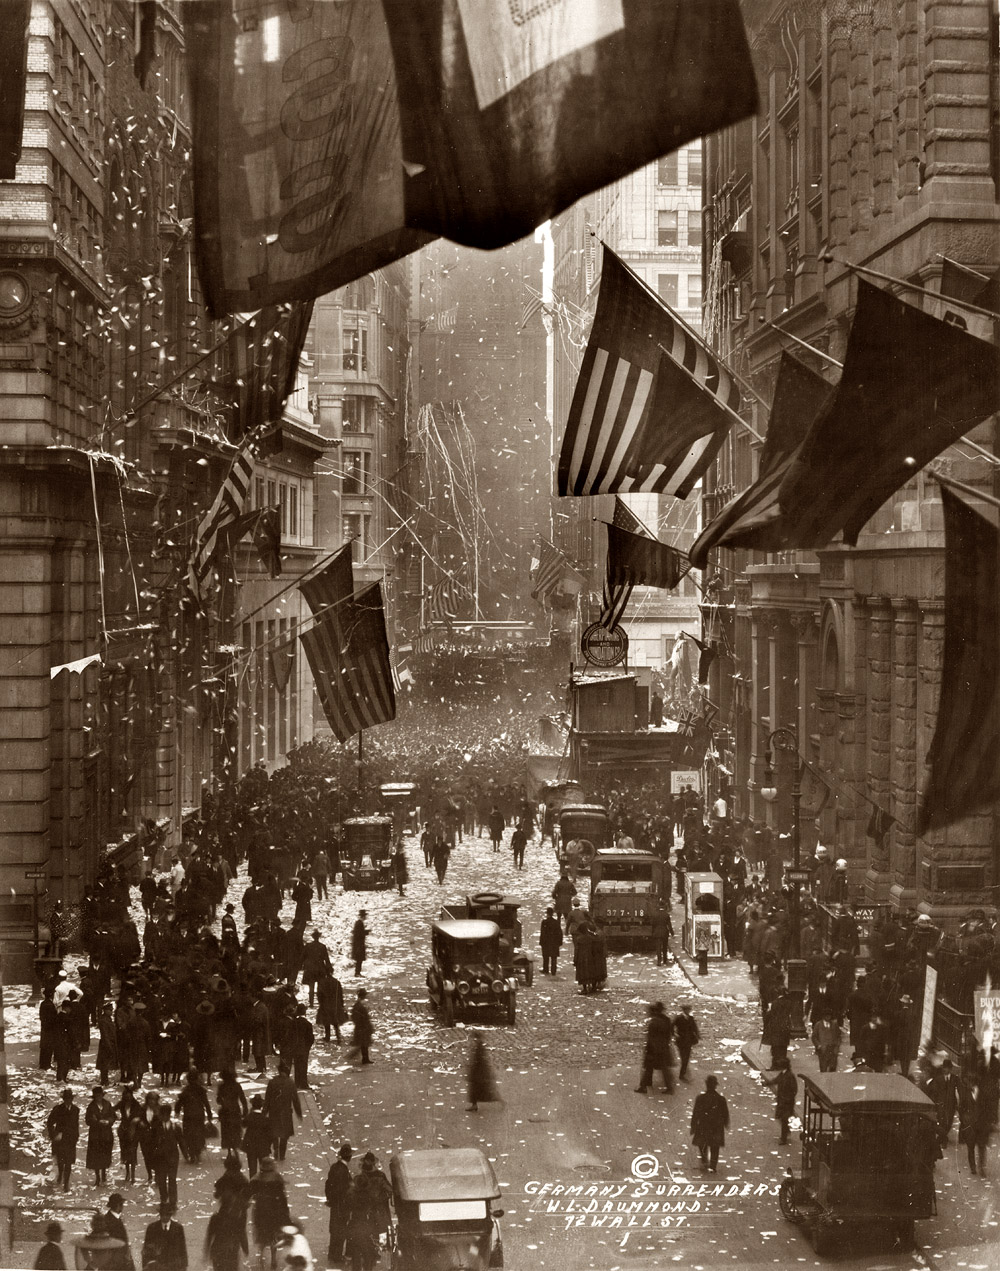 Celebration on Wall Street upon the news of Germany's surrender in World War I. November 1918. View full size. Photograph by W.L. Drummond.